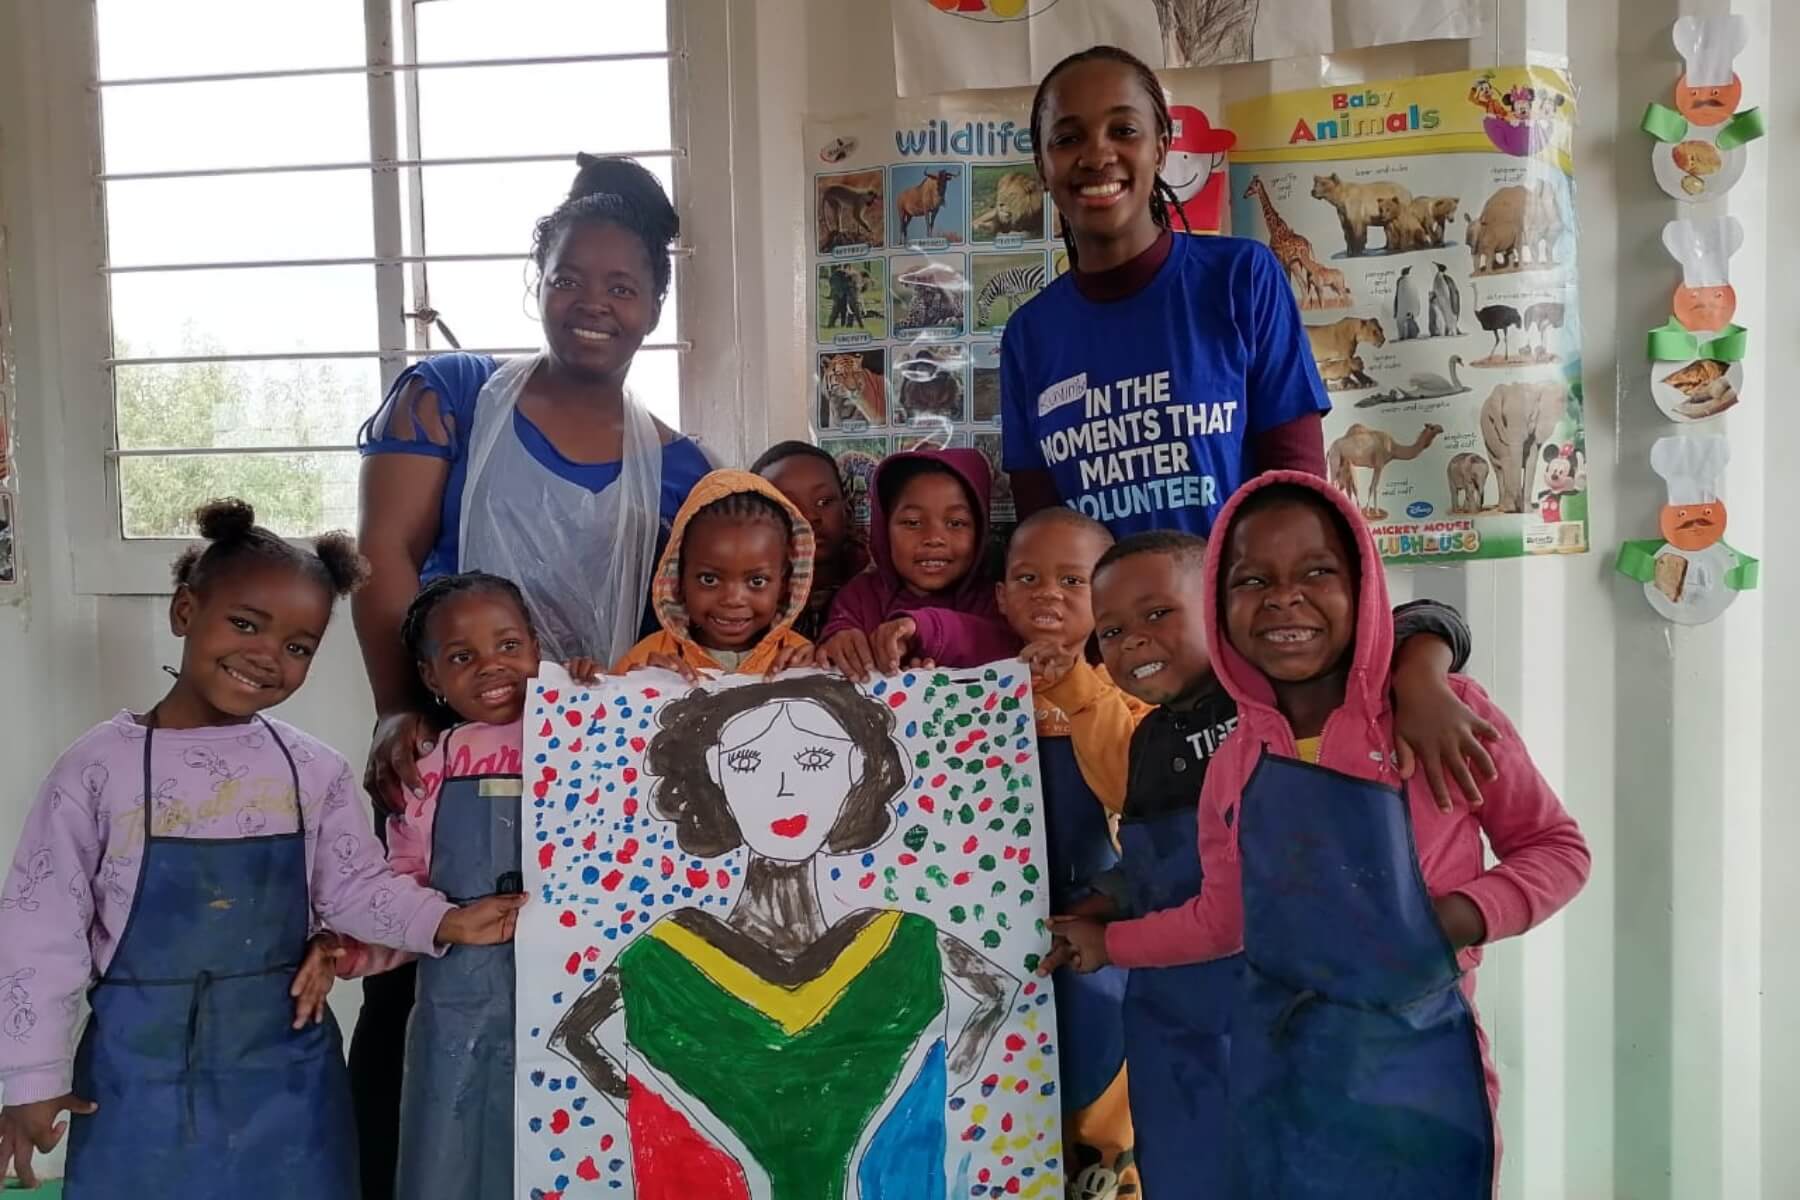 winnie mabaso corporate days bring joy and partnership between team mabaso and corporate companies in south africa- have fun doing arts and crafts with the children